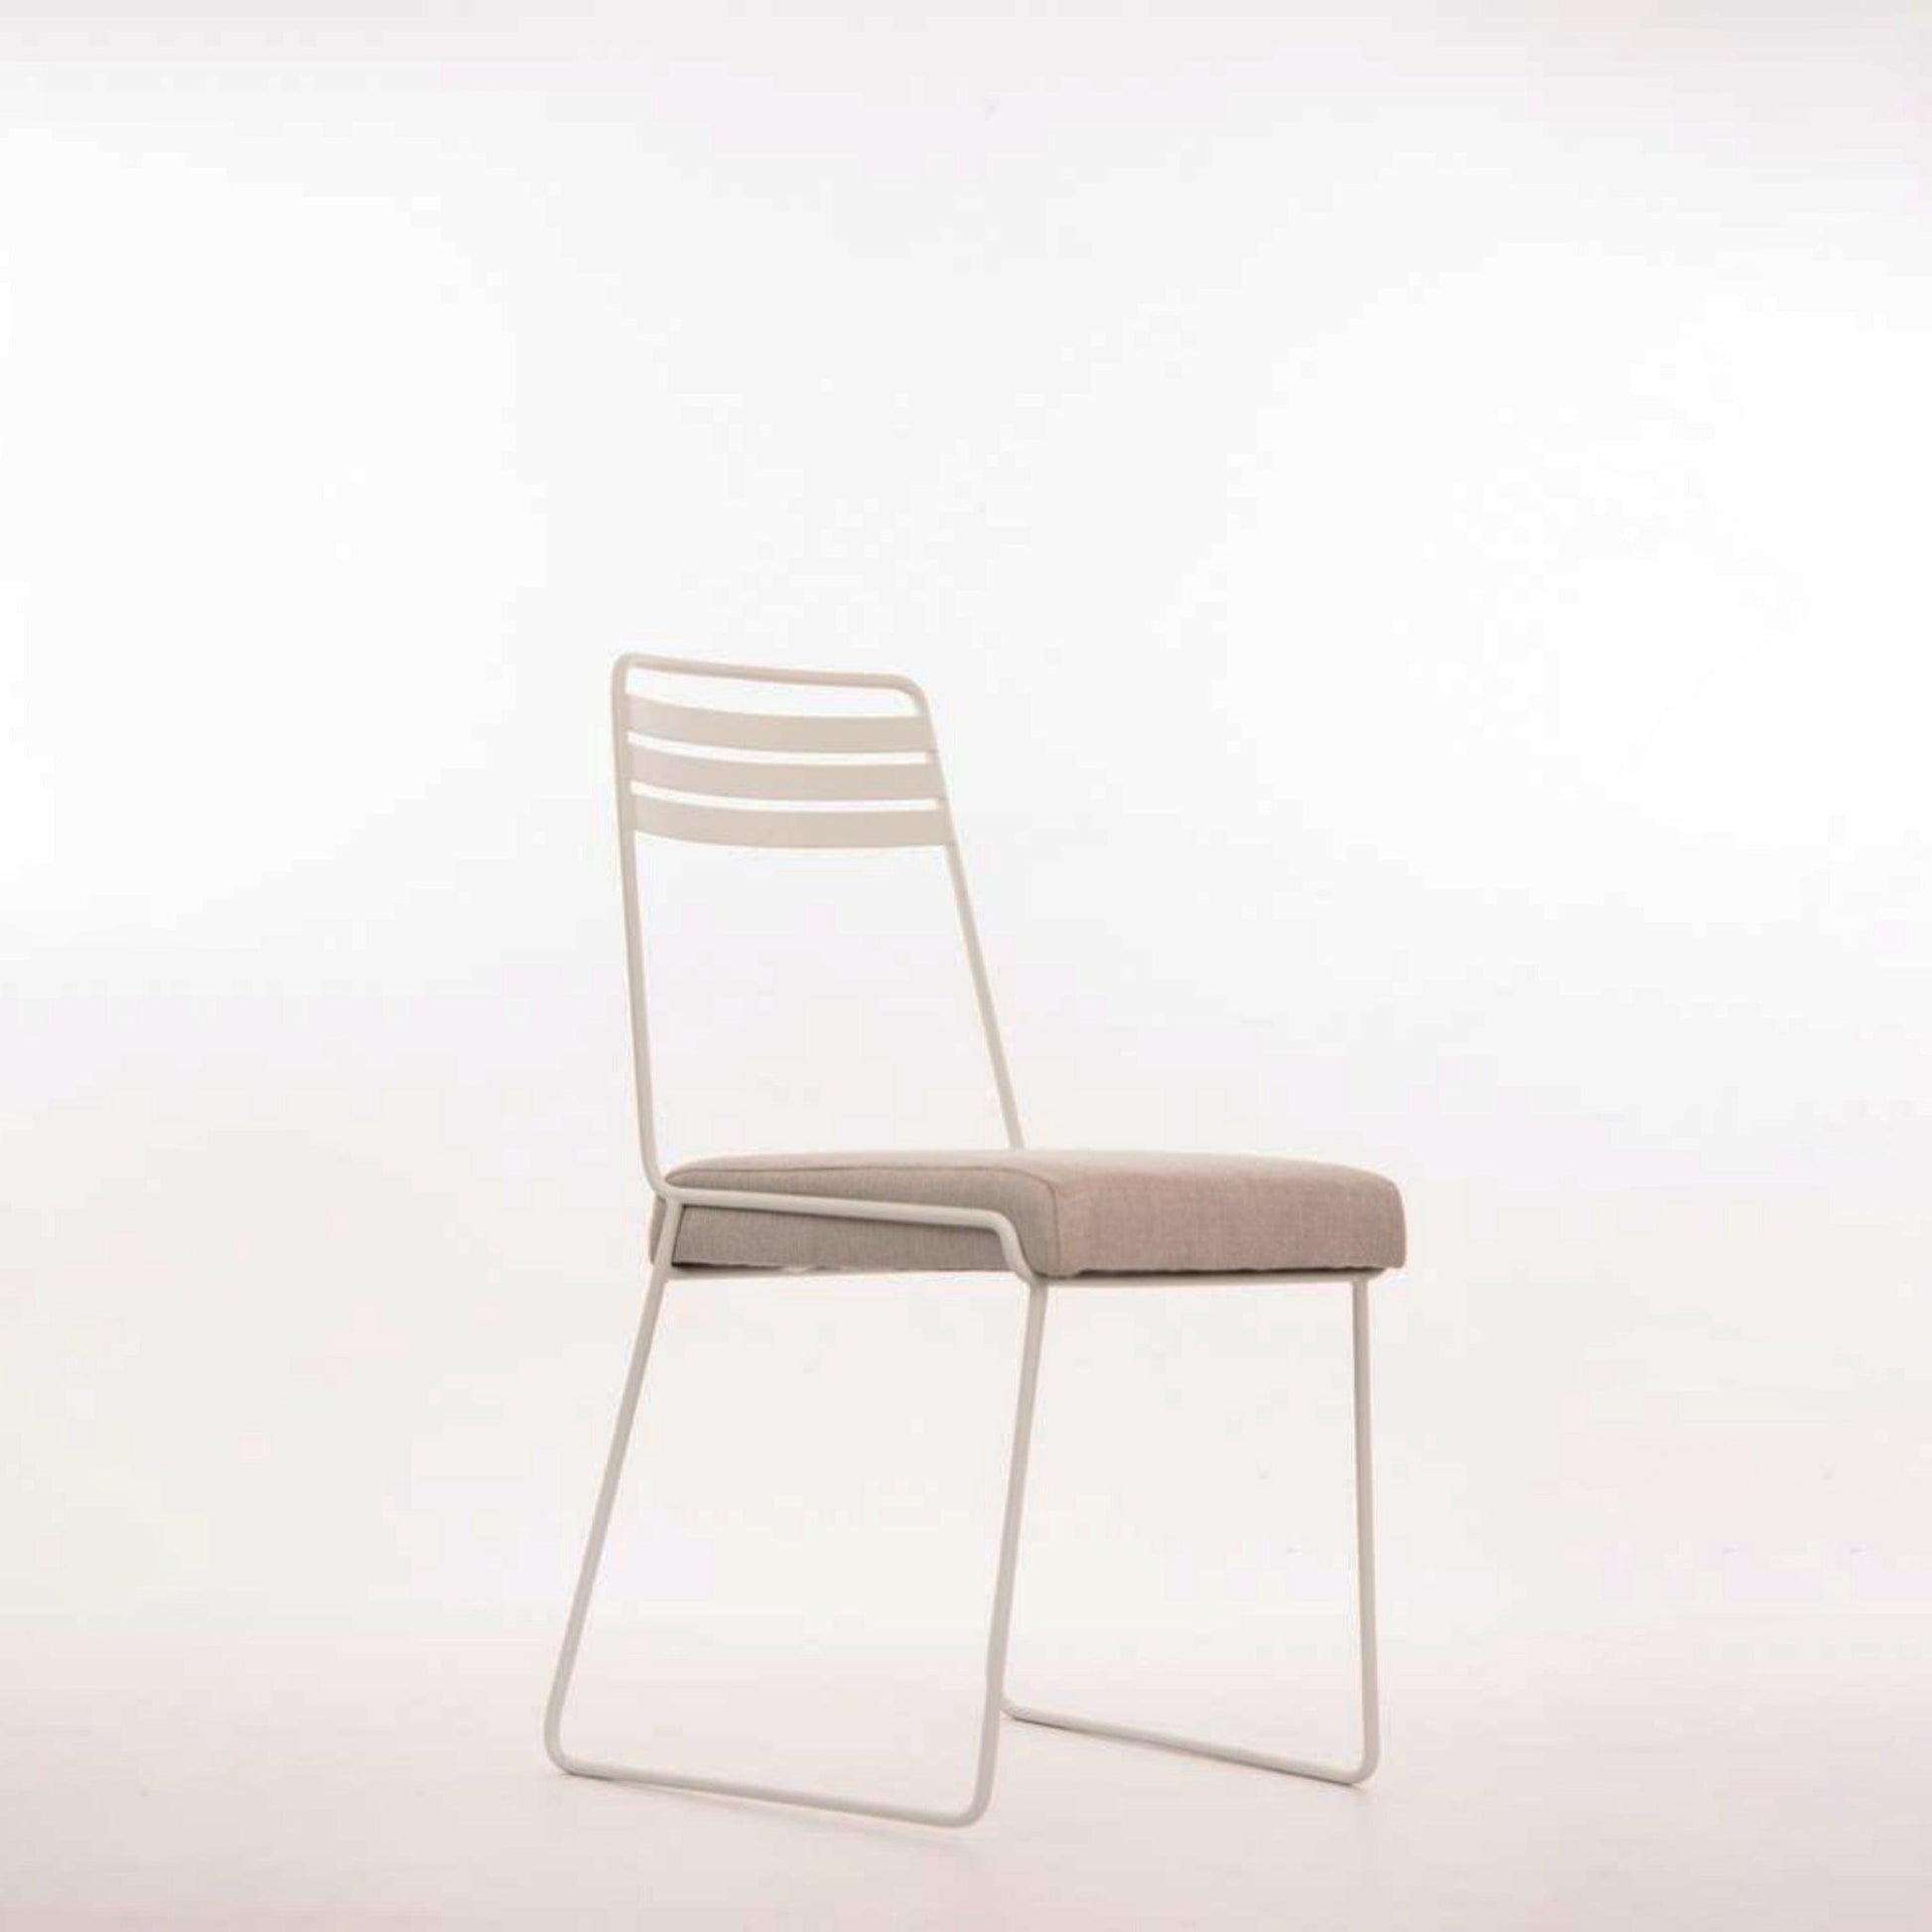 Steel chair with fabric seat - Ada Dining Chair. Seat height 450mm   Back rest 860mm